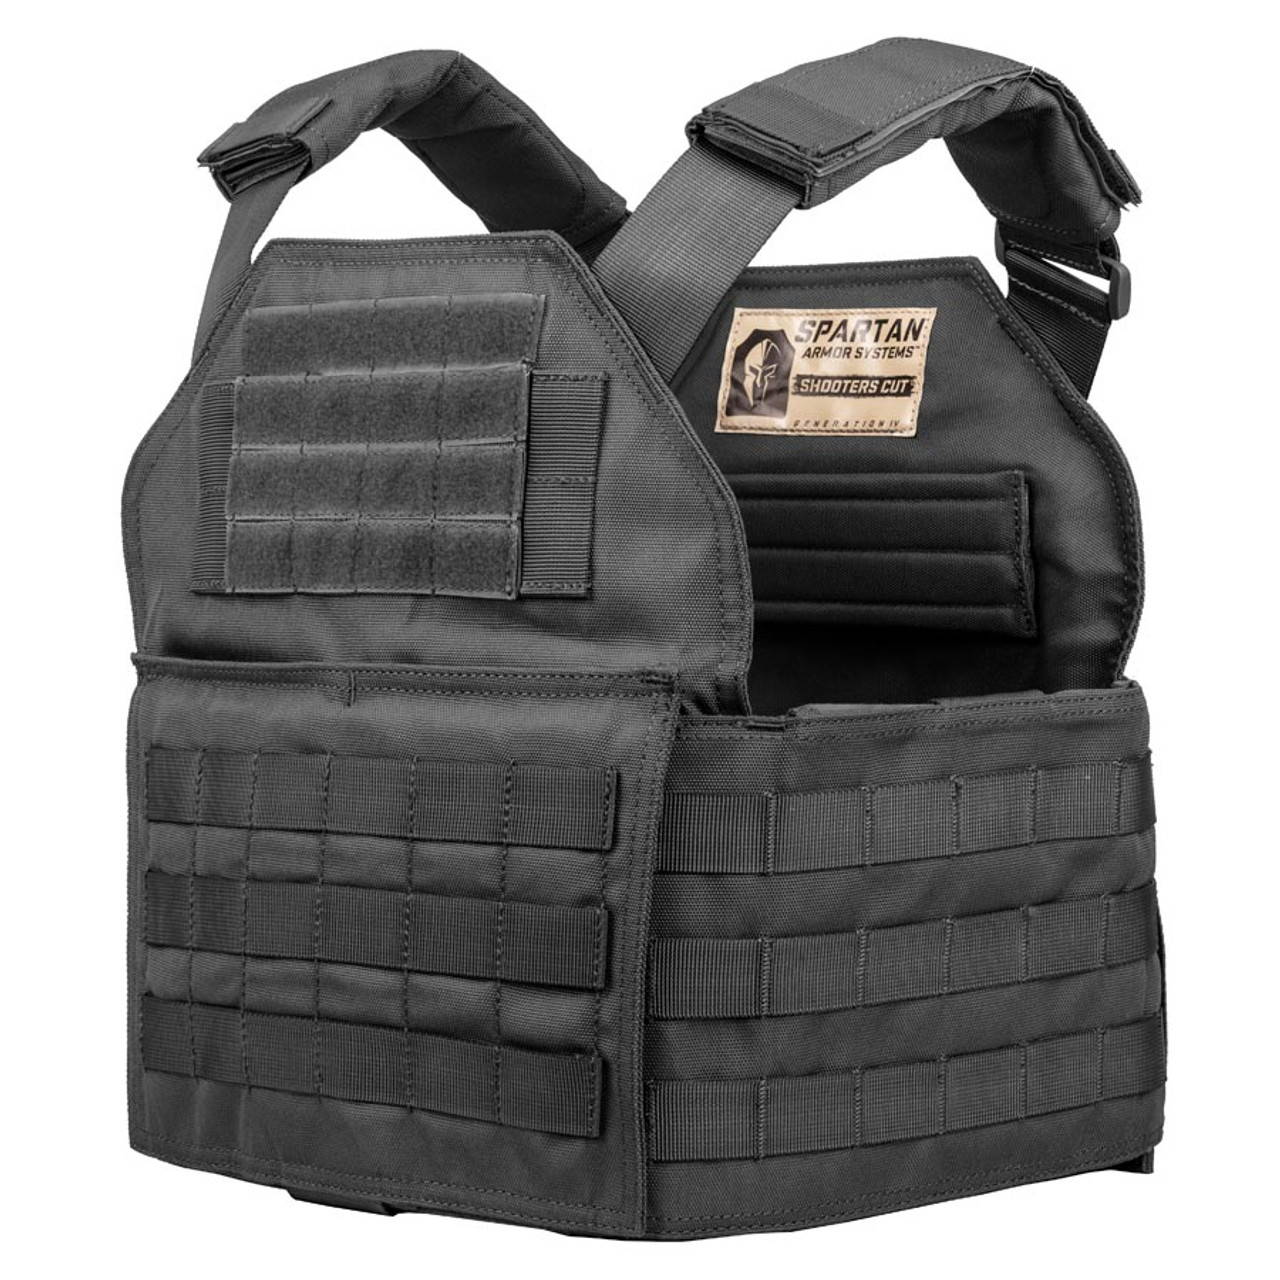 Entry Level Spartan Shooters Cut Plate Carrier